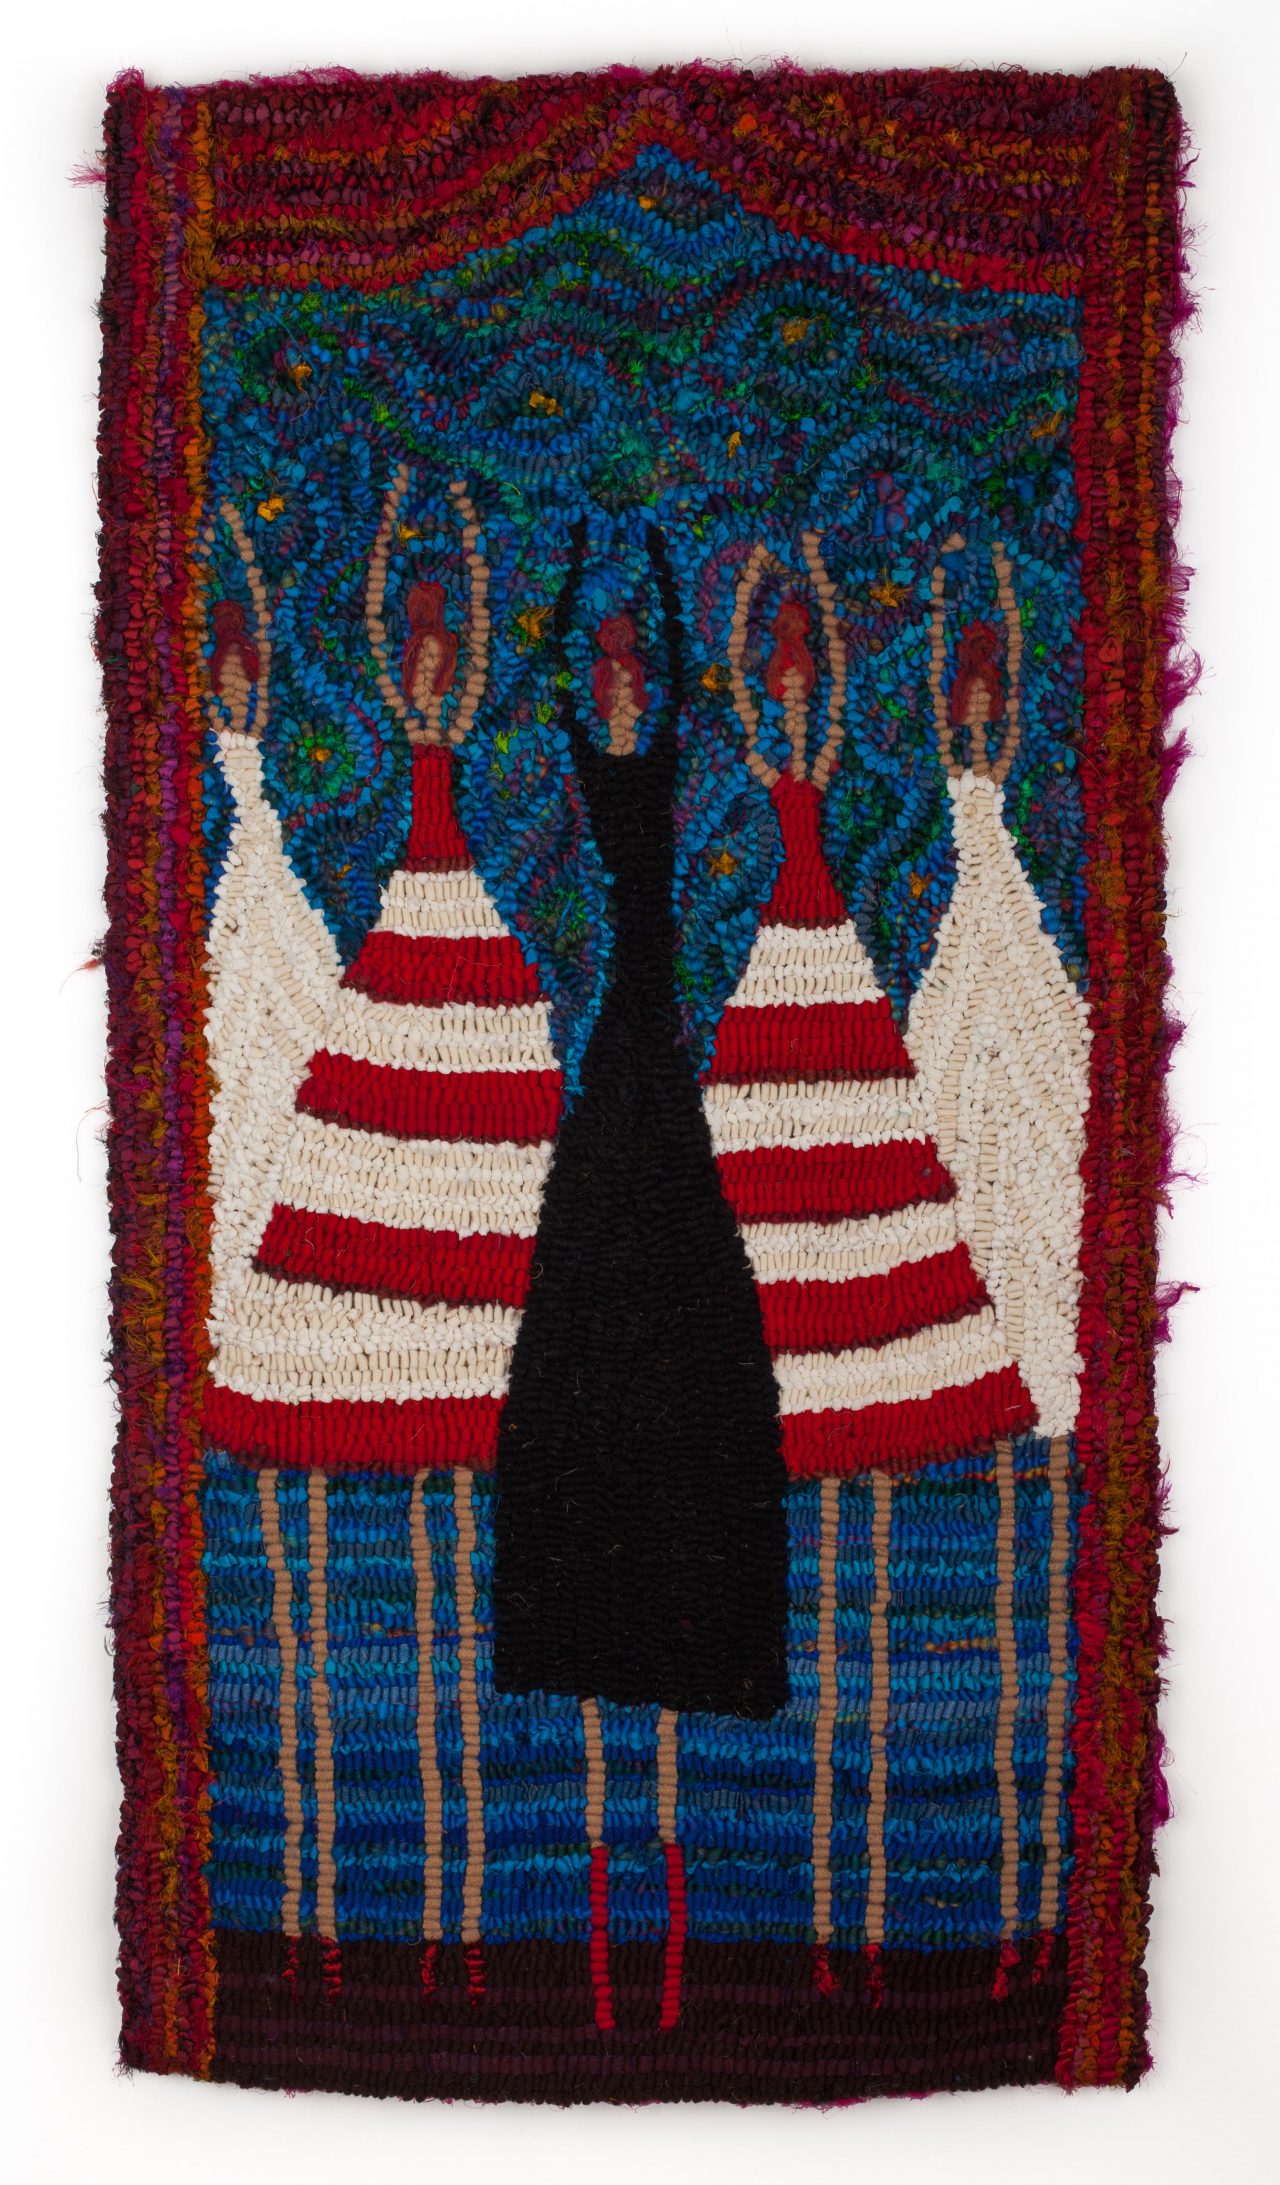 A rug hooked piece of art featuring 5 female figures, 1 in the middle with in a black dress, 2 in red and white stripes and 2 in white with a blue background and red edging by Laura Kenney.